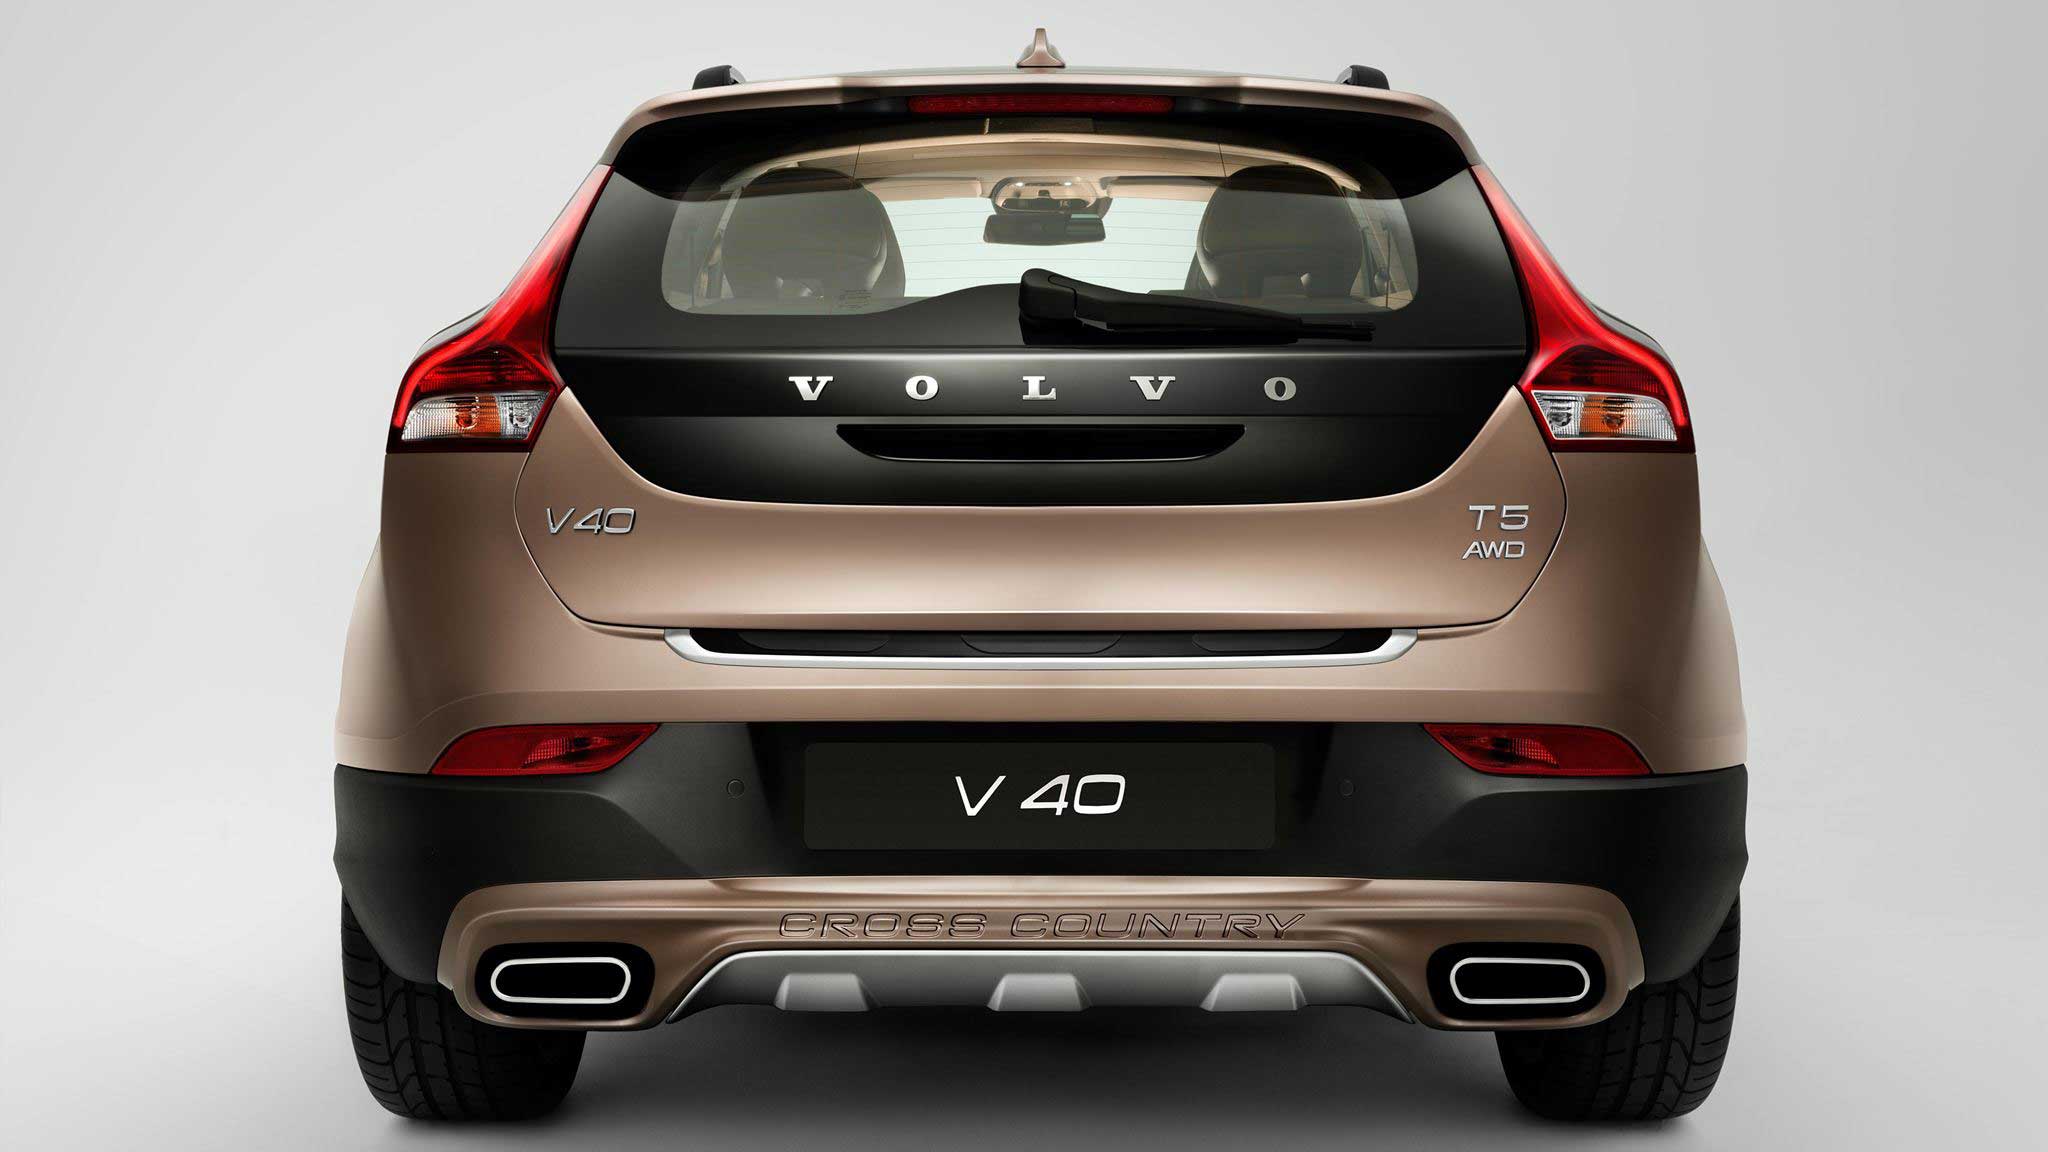 Volvo V40 D3 R Design Exterior Image Gallery Pictures Photos